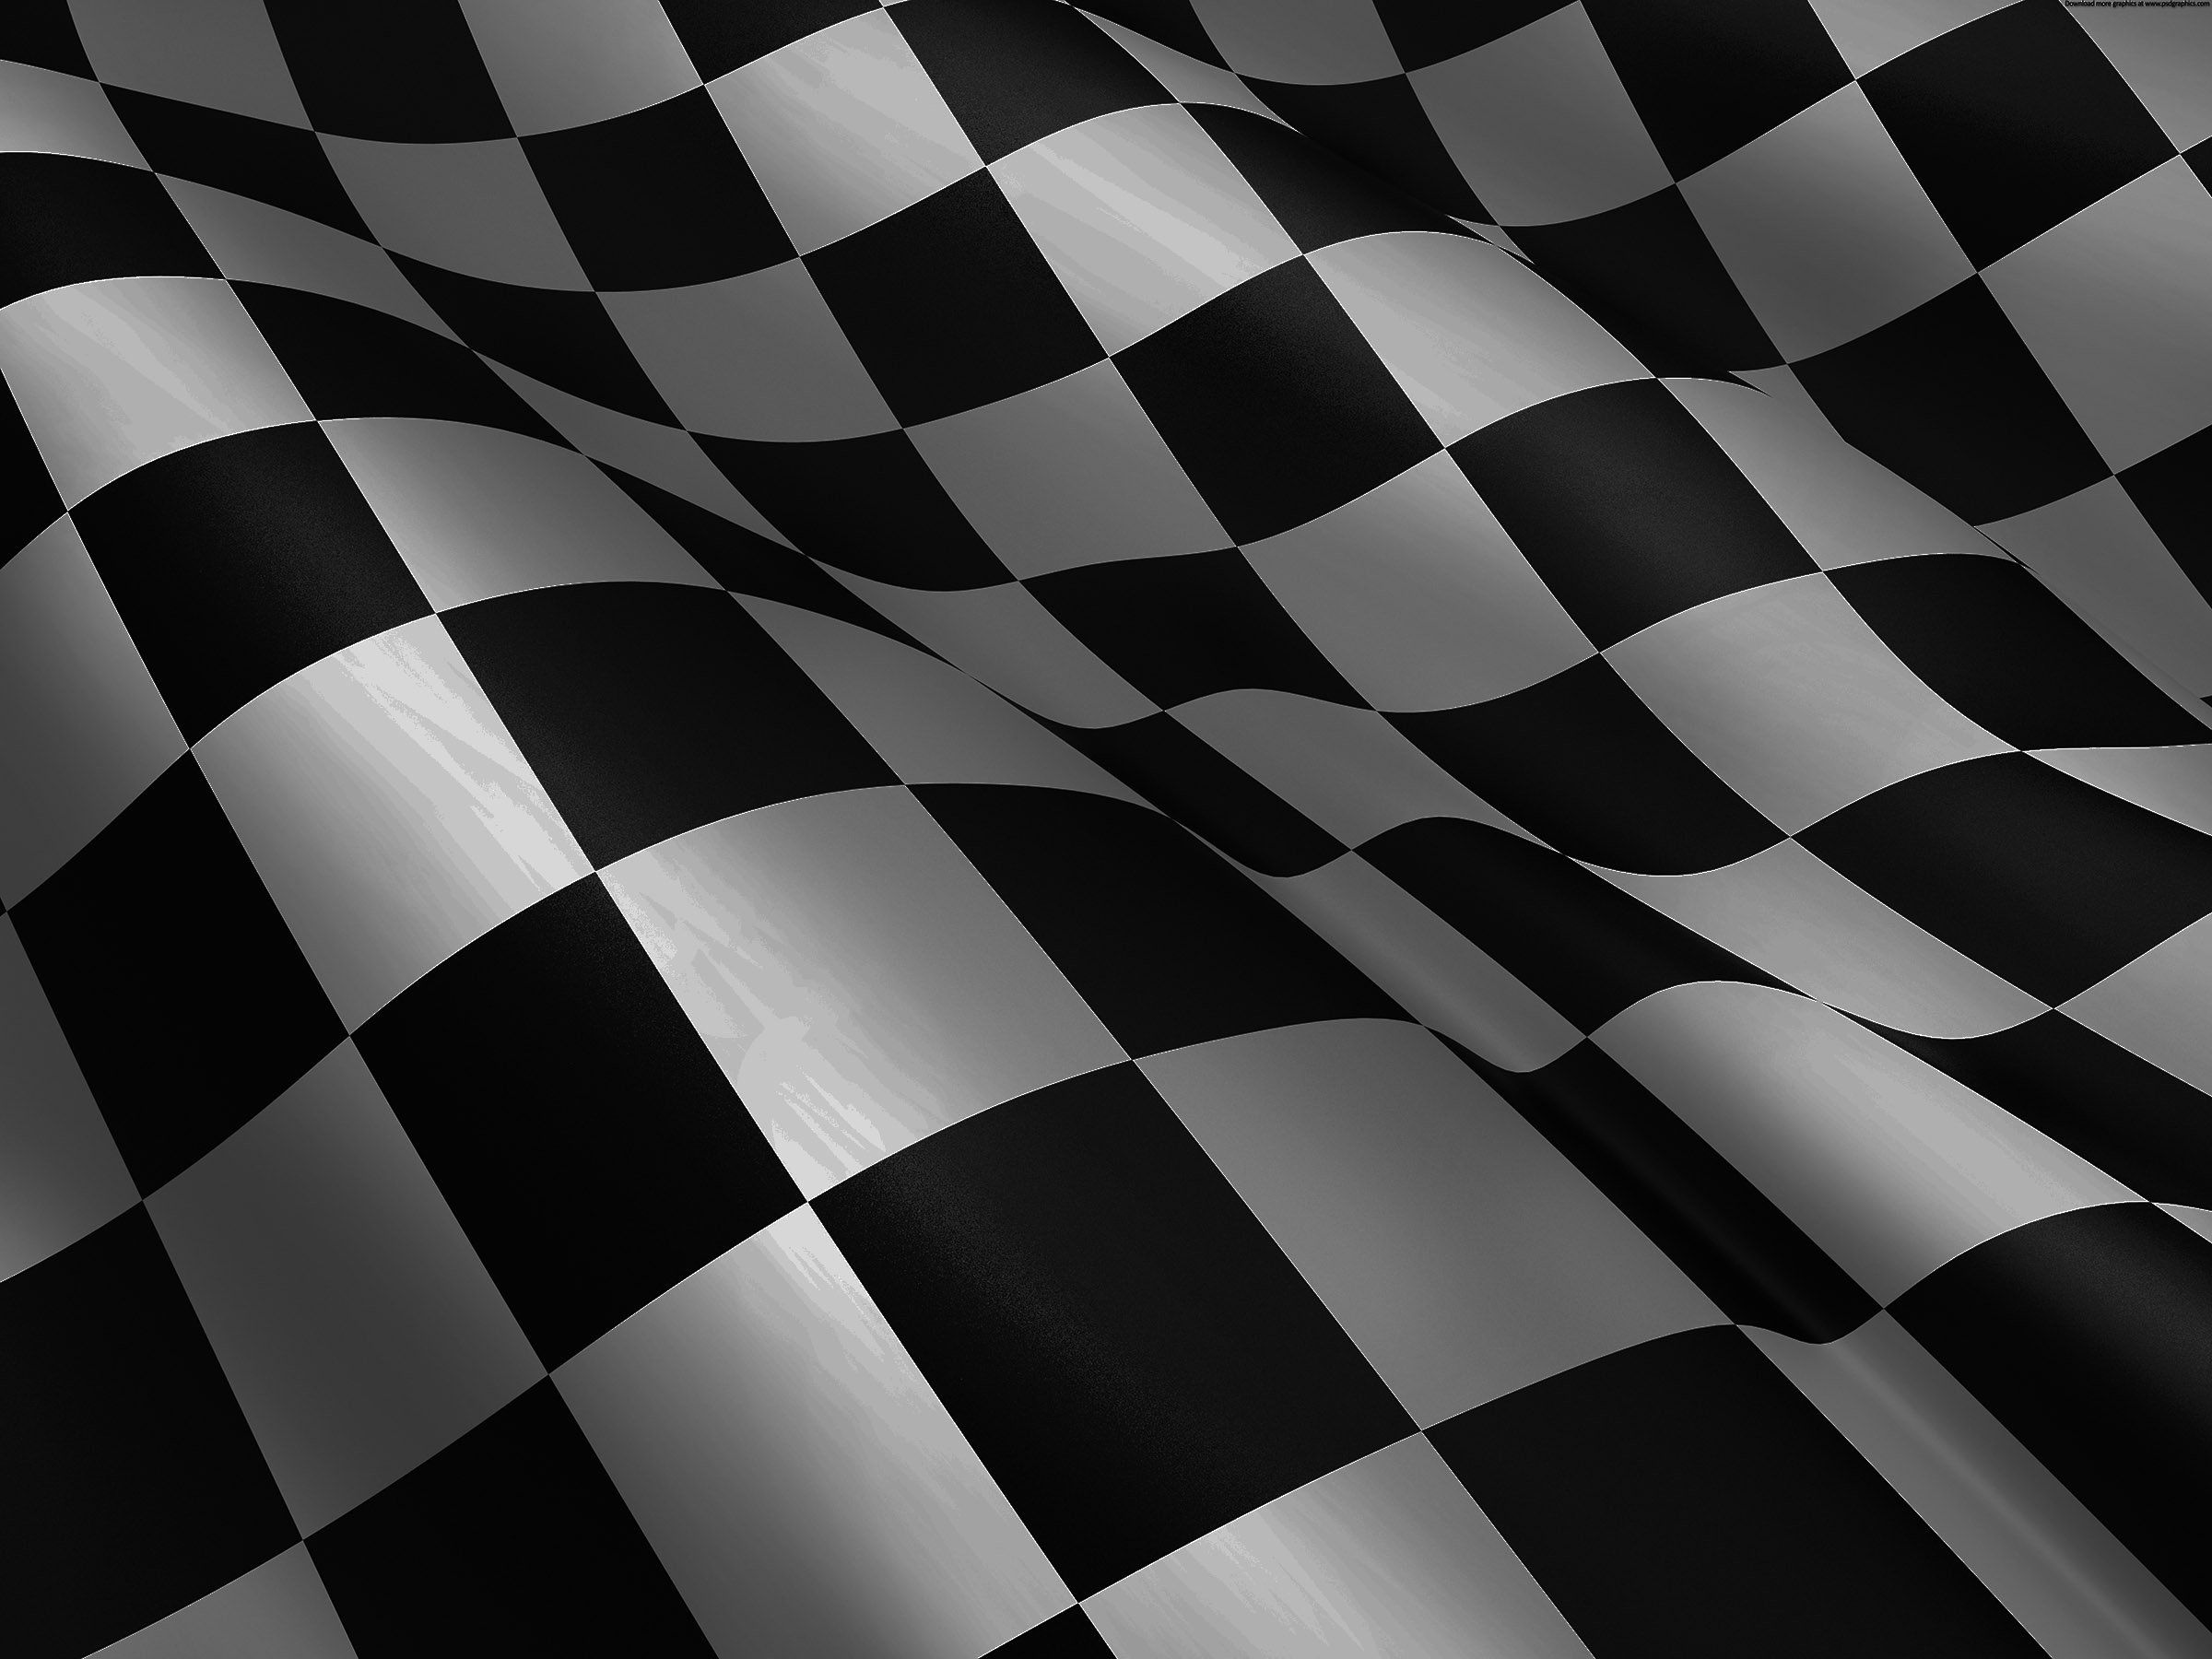 Free download Gallery for checkered flag computer wallpaper [2400x1800] for your Desktop, Mobile & Tablet. Explore Checkered Flag Wallpaper. Flag Wallpaper Borders, Prepasted Checkered Flag Wallpaper, Racing Checkered Flag Wallpaper Borders